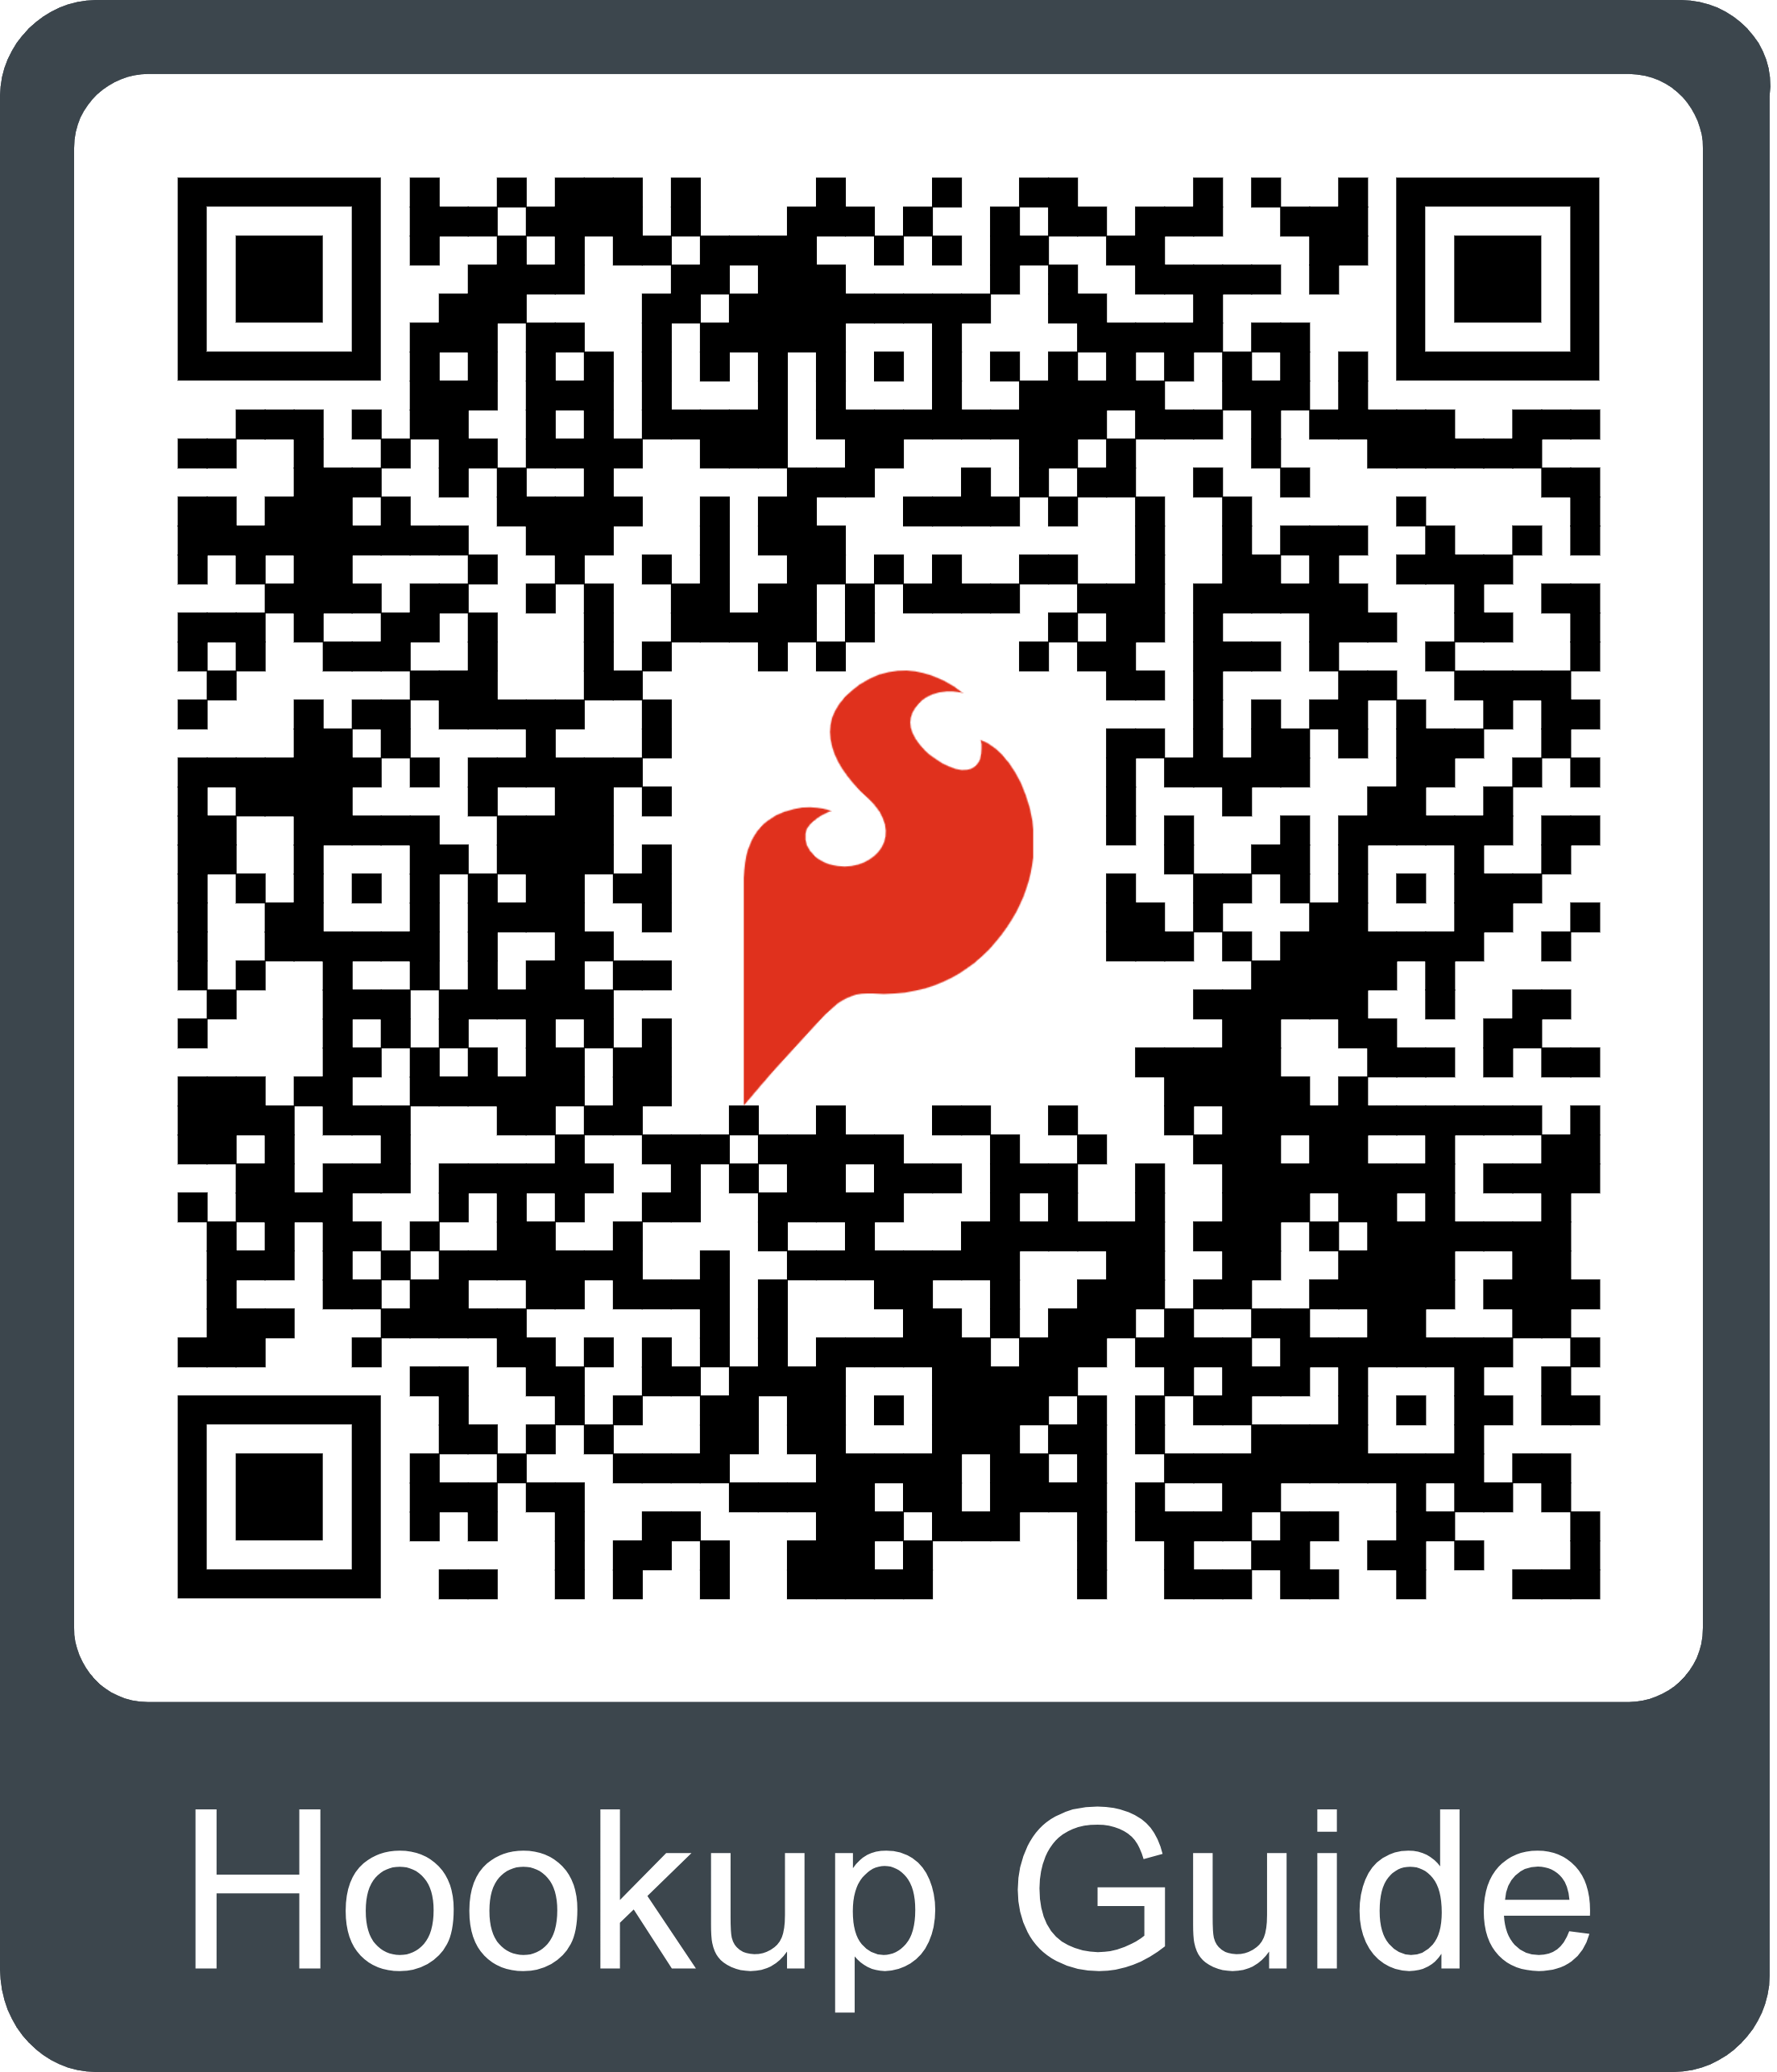 QR code to the hookup guide